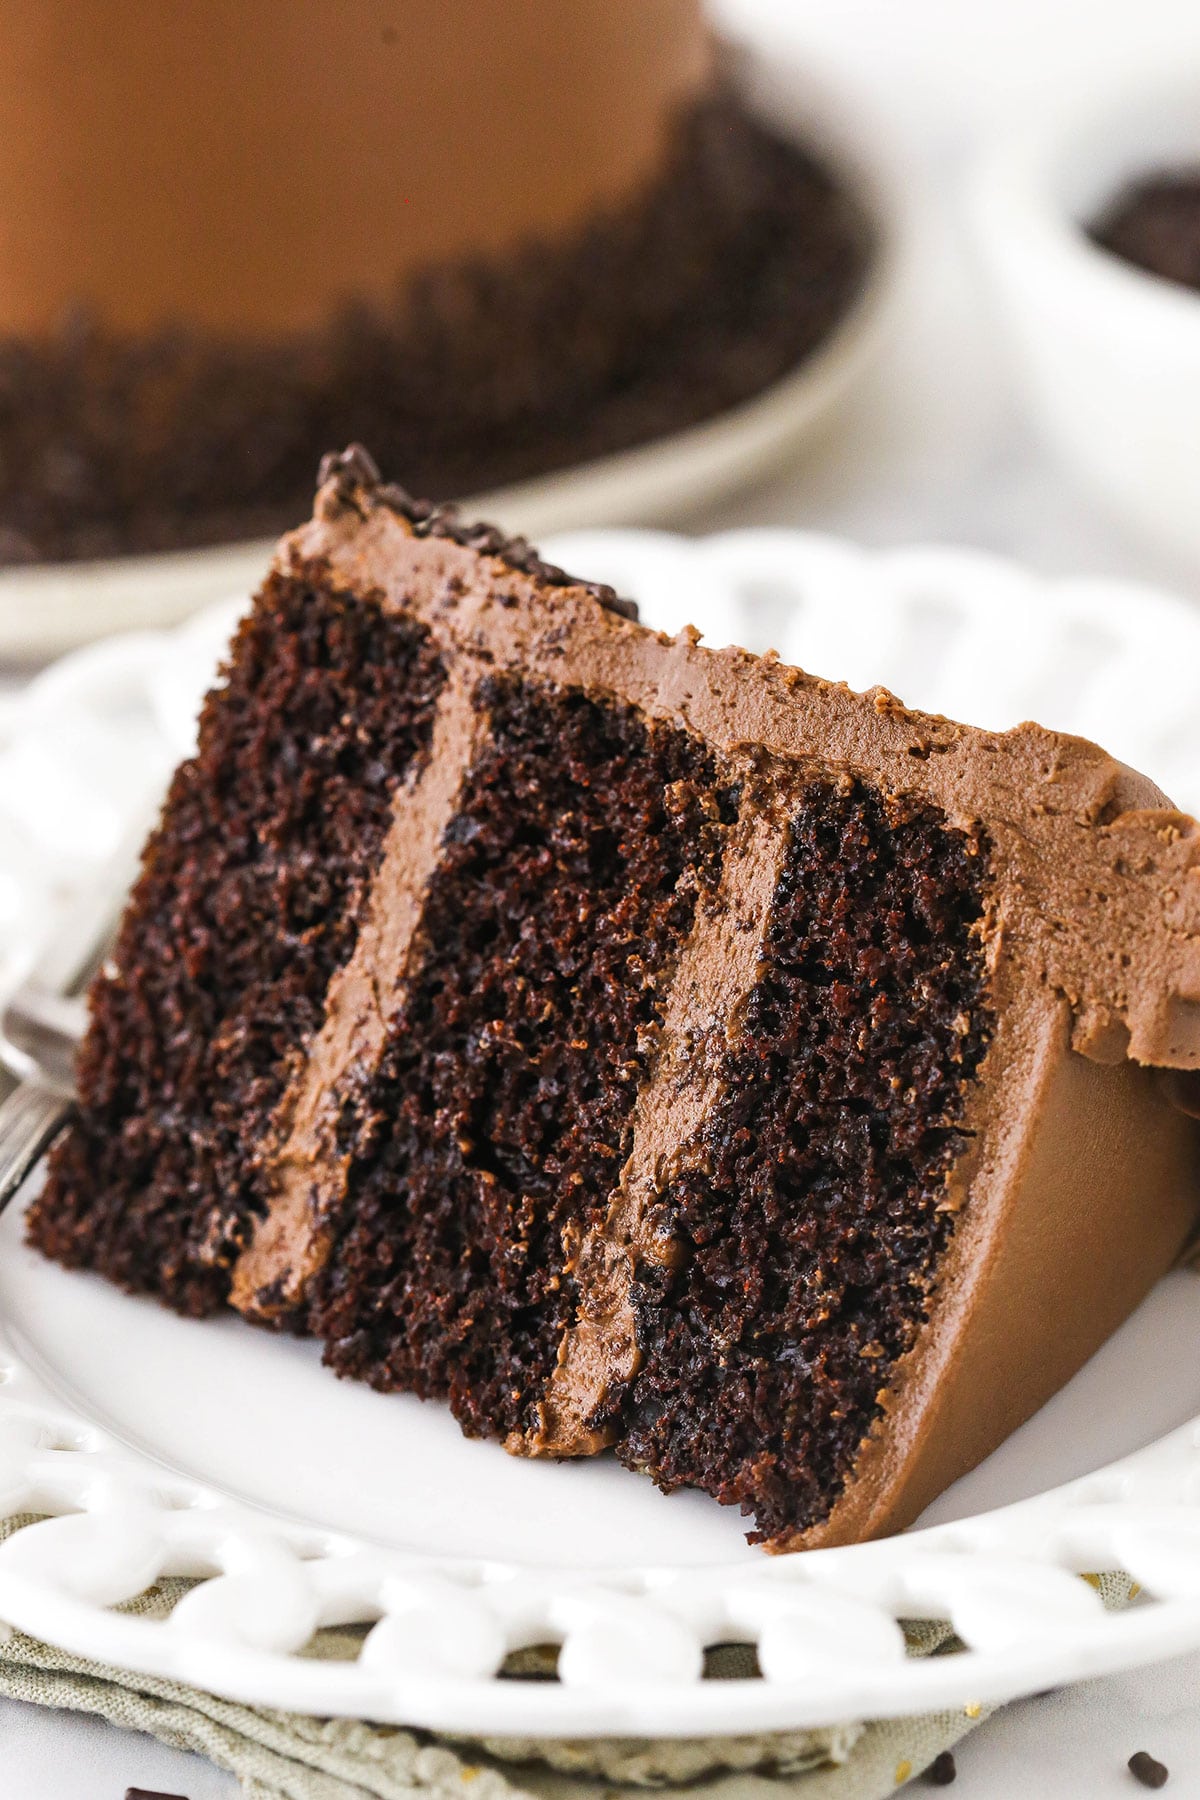 A close-up shot of a piece of chocolate cake with chocolate frosting on a white plate